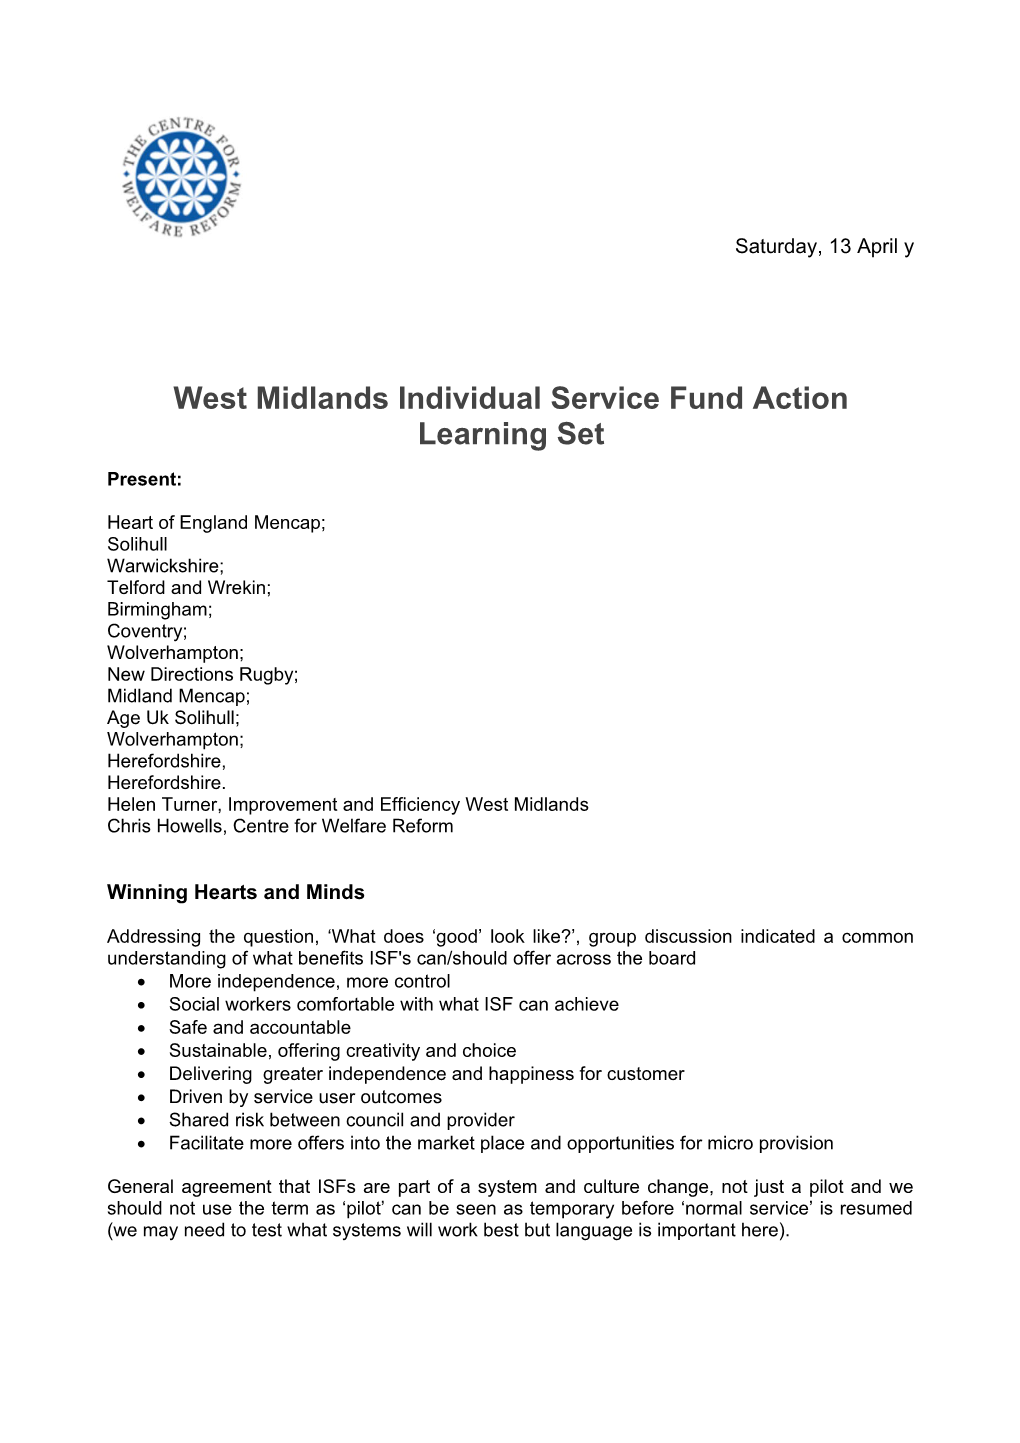 West Midlands Individual Service Fund Action Learning Set